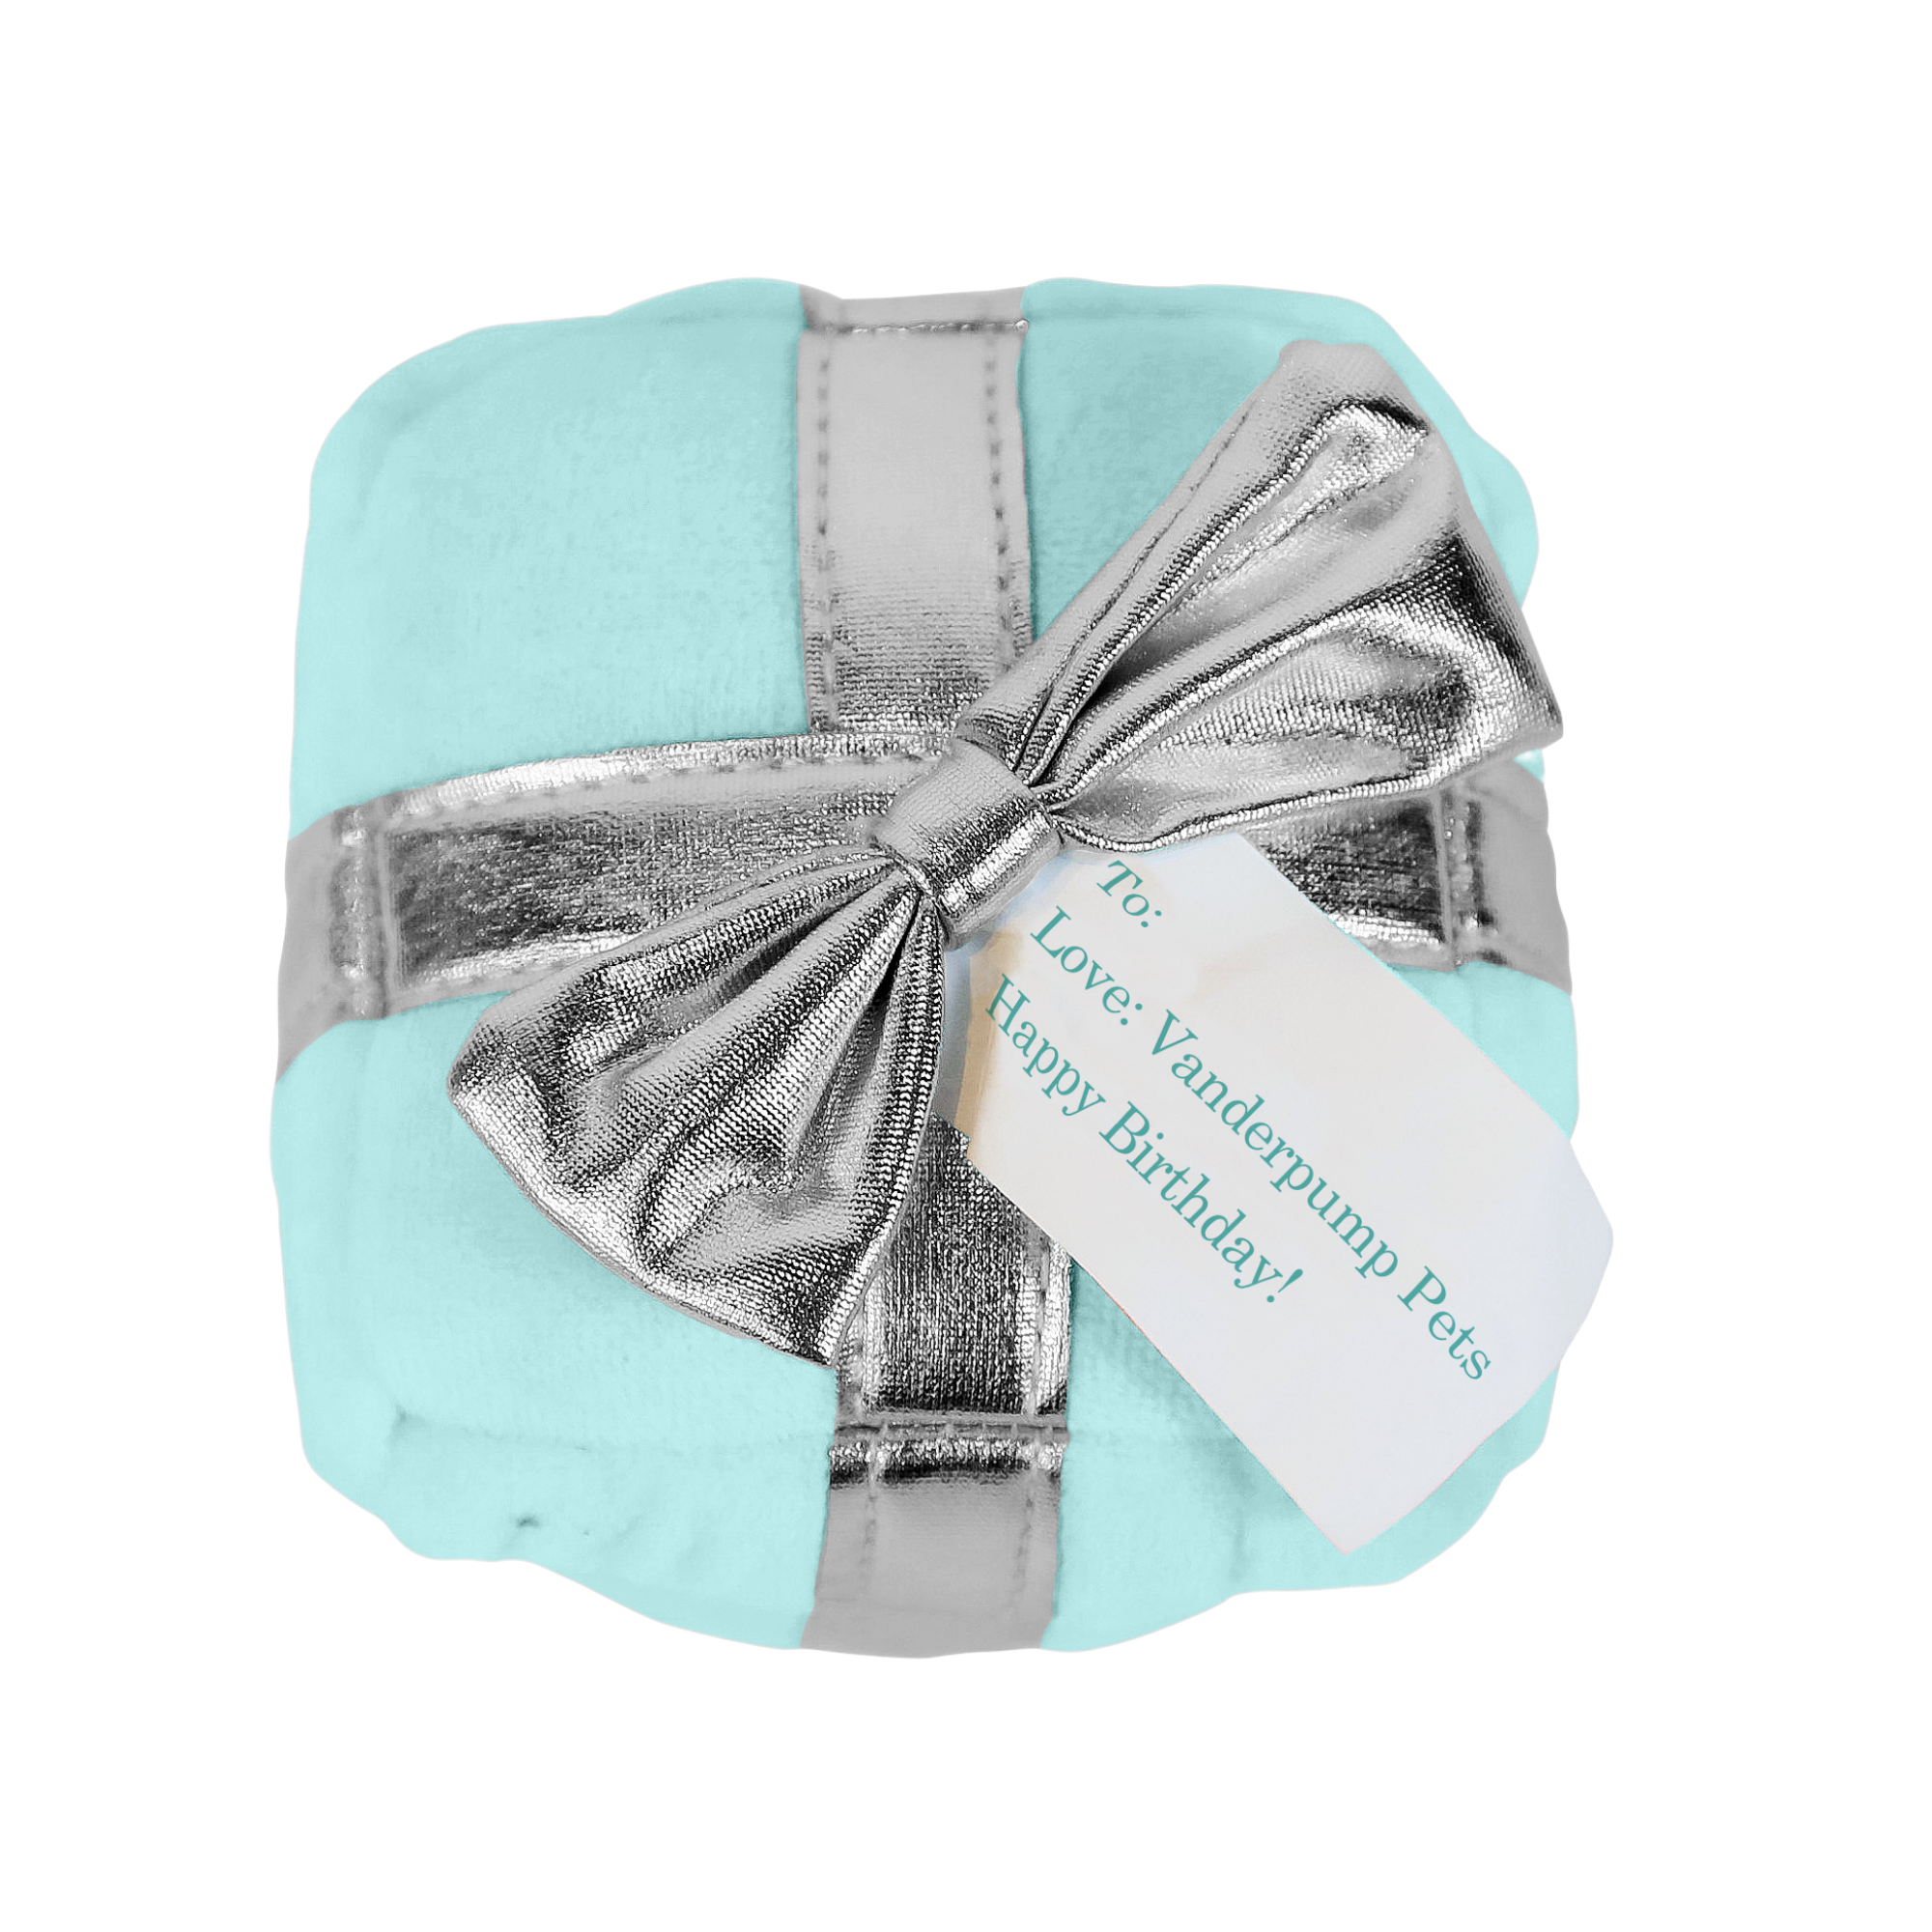 Pet Boutique - Dog Toy - VP Wrapped Gift Toy: Blue by Vanderpump Pets